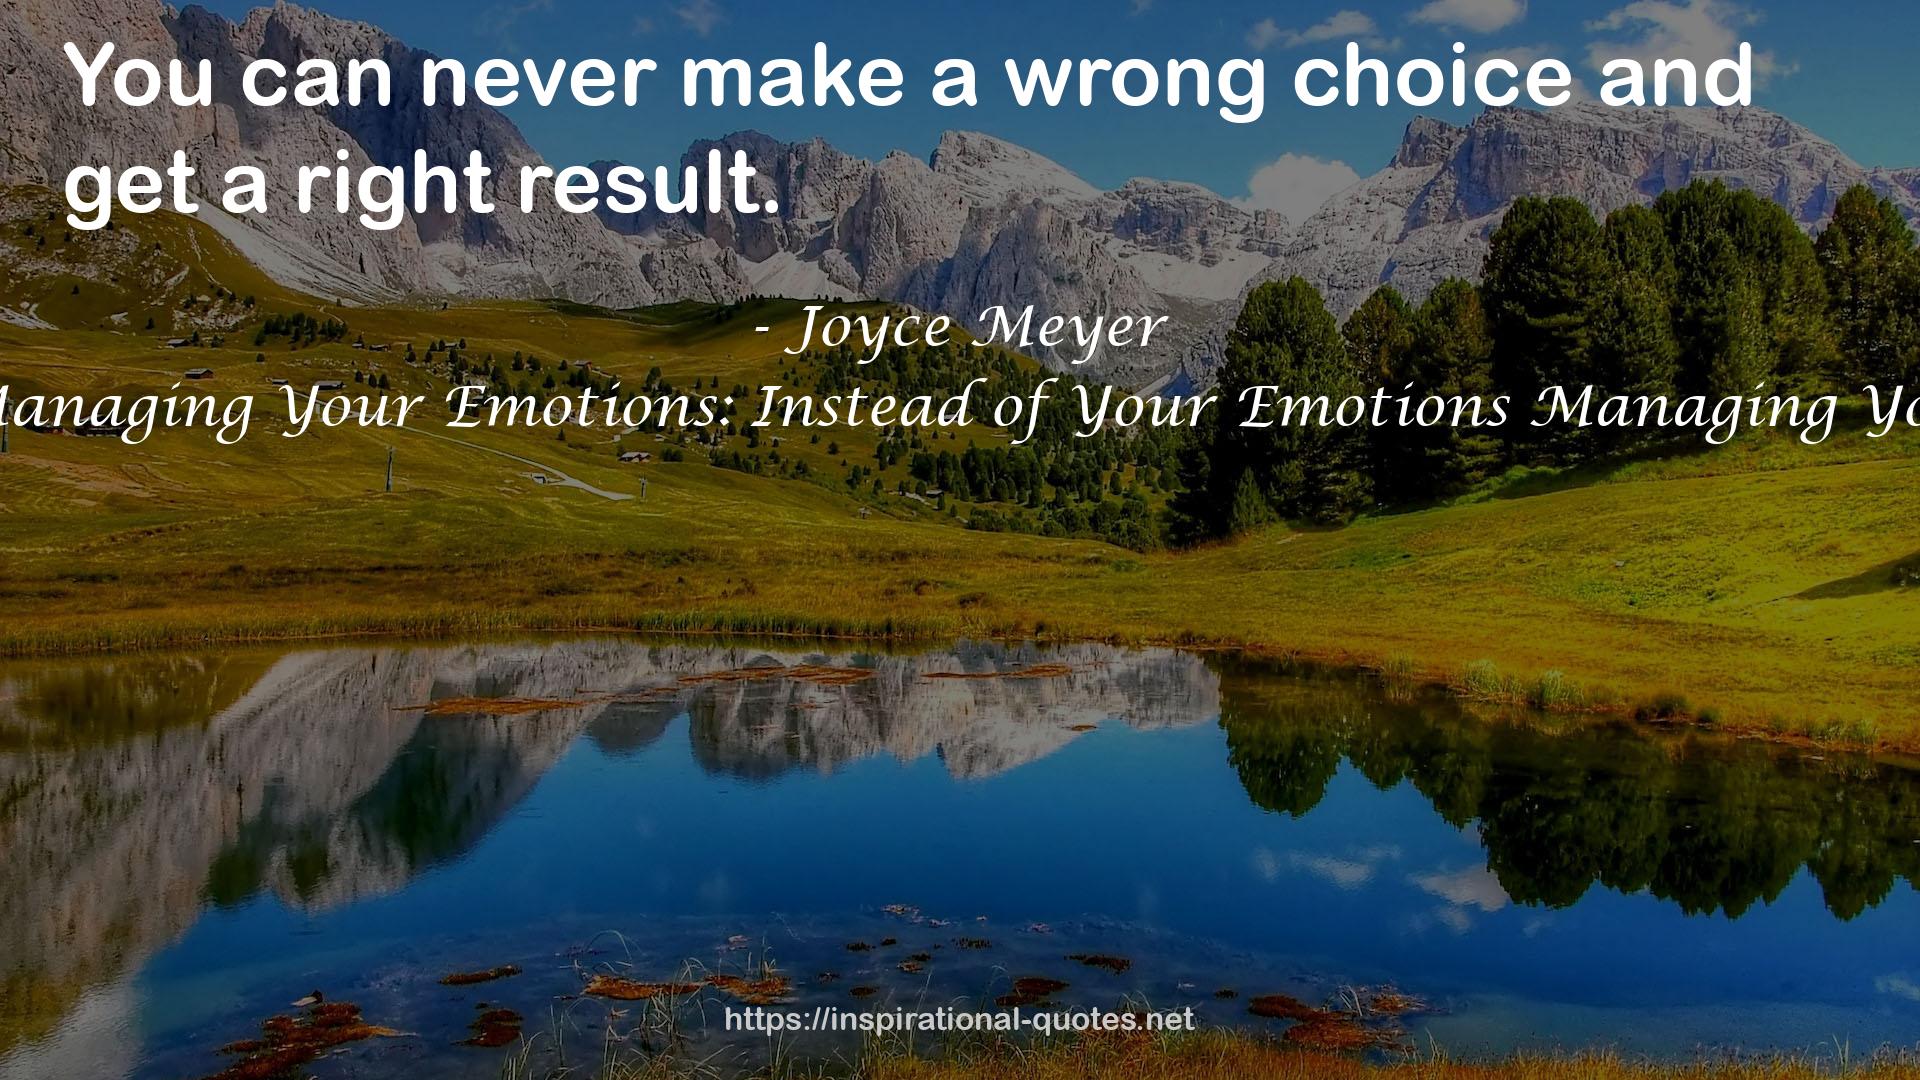 Managing Your Emotions: Instead of Your Emotions Managing You QUOTES